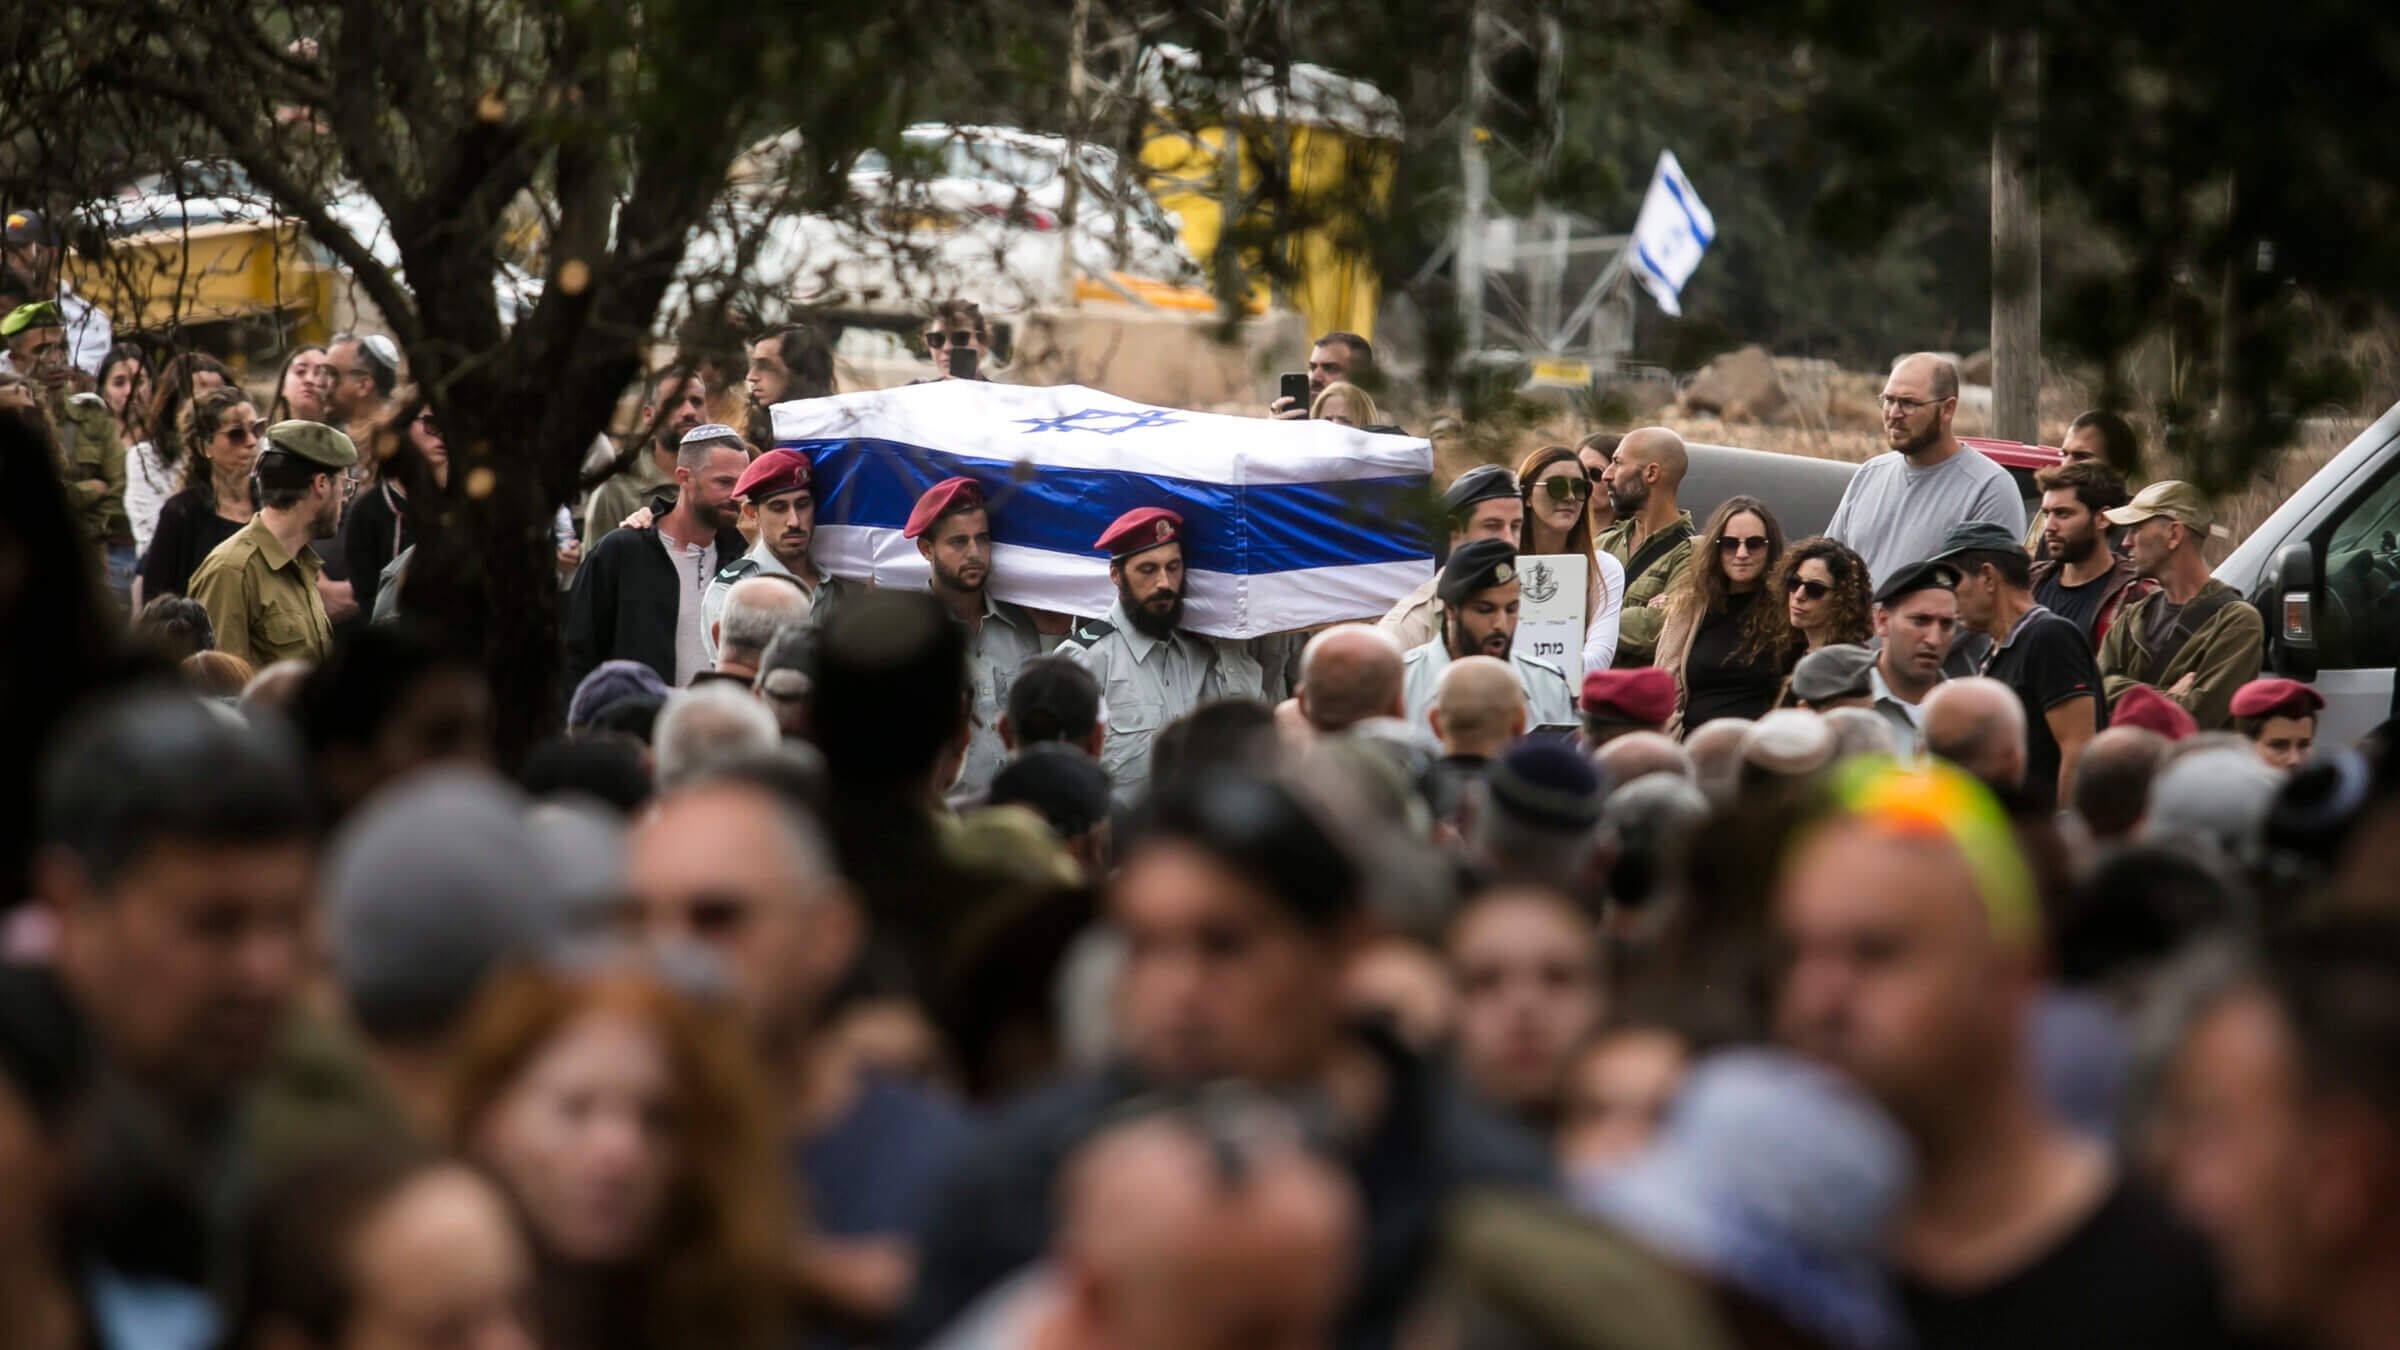 Family and friends mourn during the funeral of fallen soldier Matan Meir, killed in the Gaza Strip, on Nov. 13 in Odem, Israel. The Jewish way of grieving individual loss can be instructive now as the global Jewish community copes with the staggering losses over the past month.